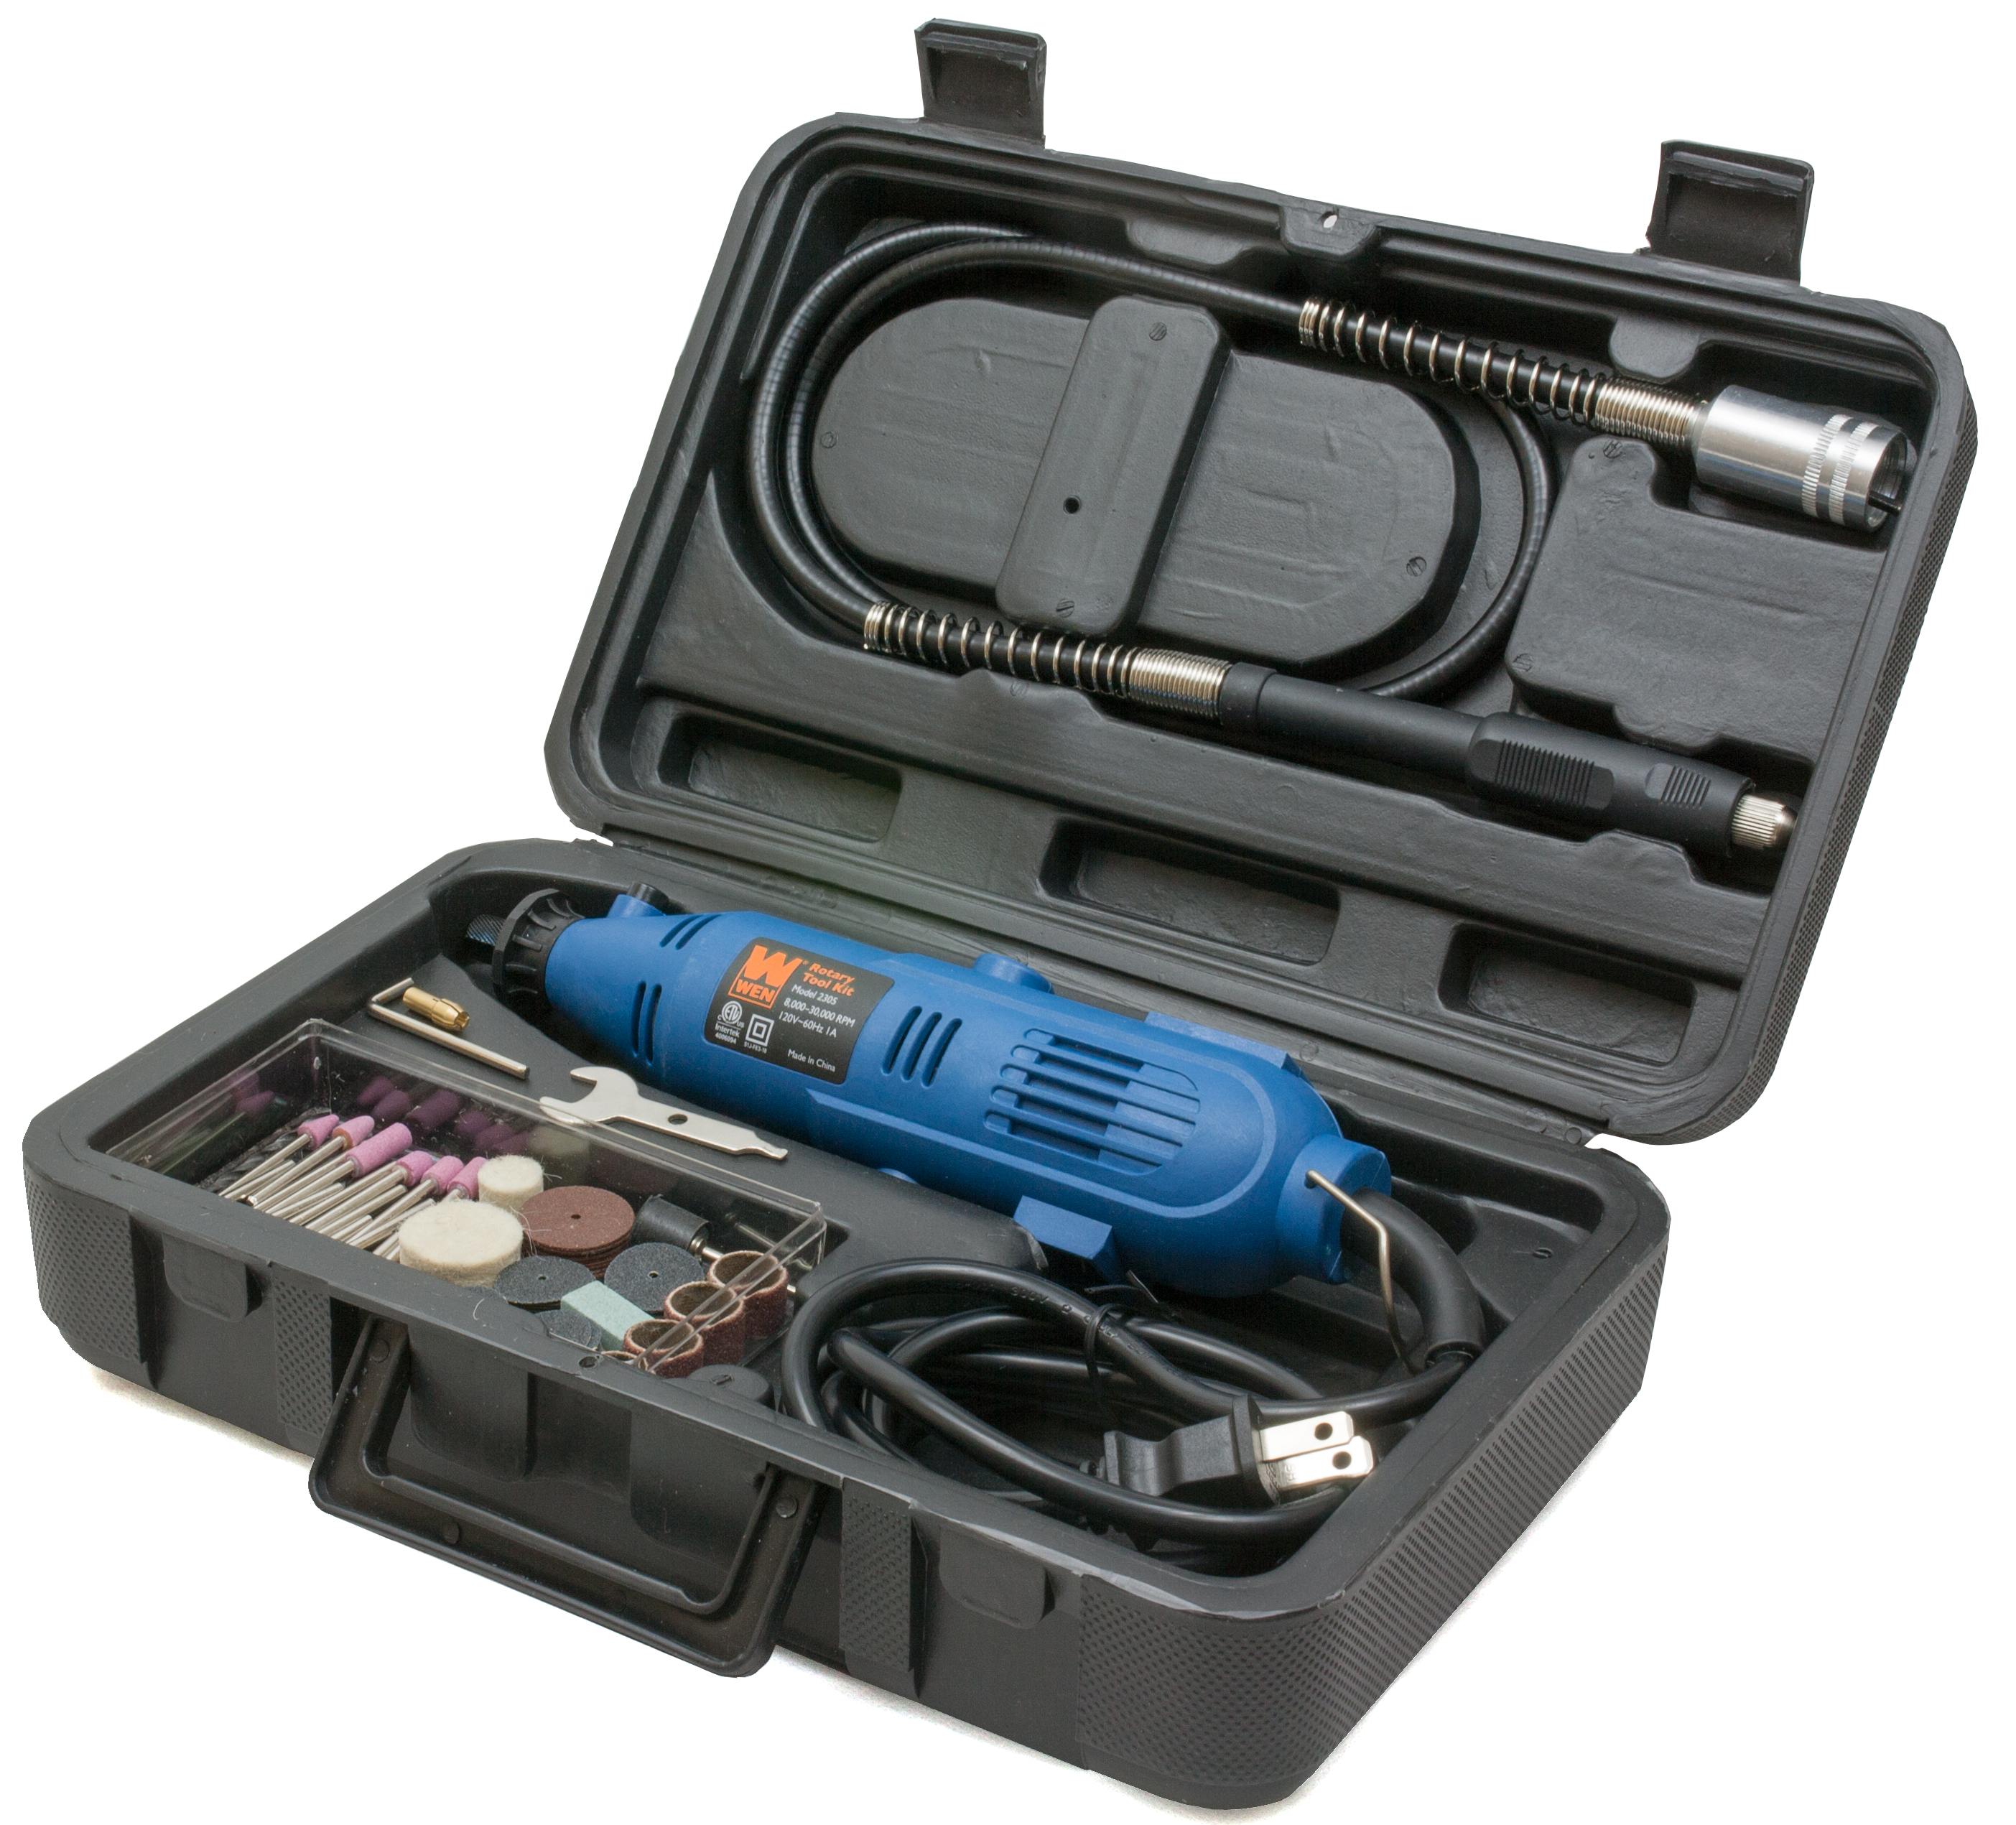 WEN Rotary Tool Kit with Flex Shaft, 2305 - image 2 of 6